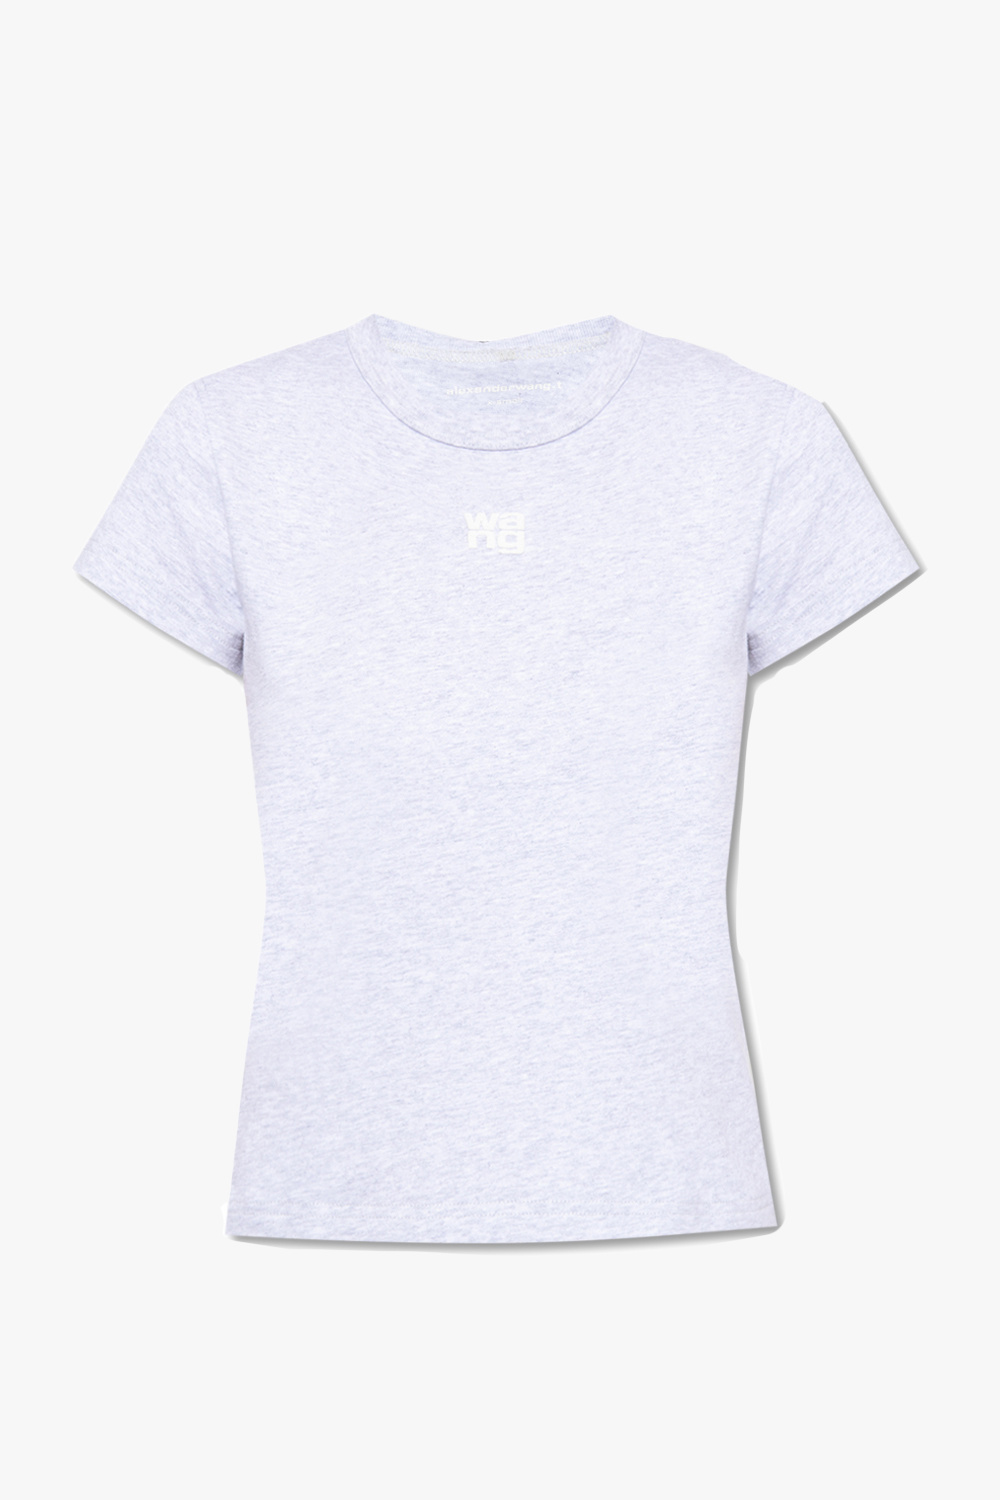 T by Alexander Wang T-shirt Island with logo